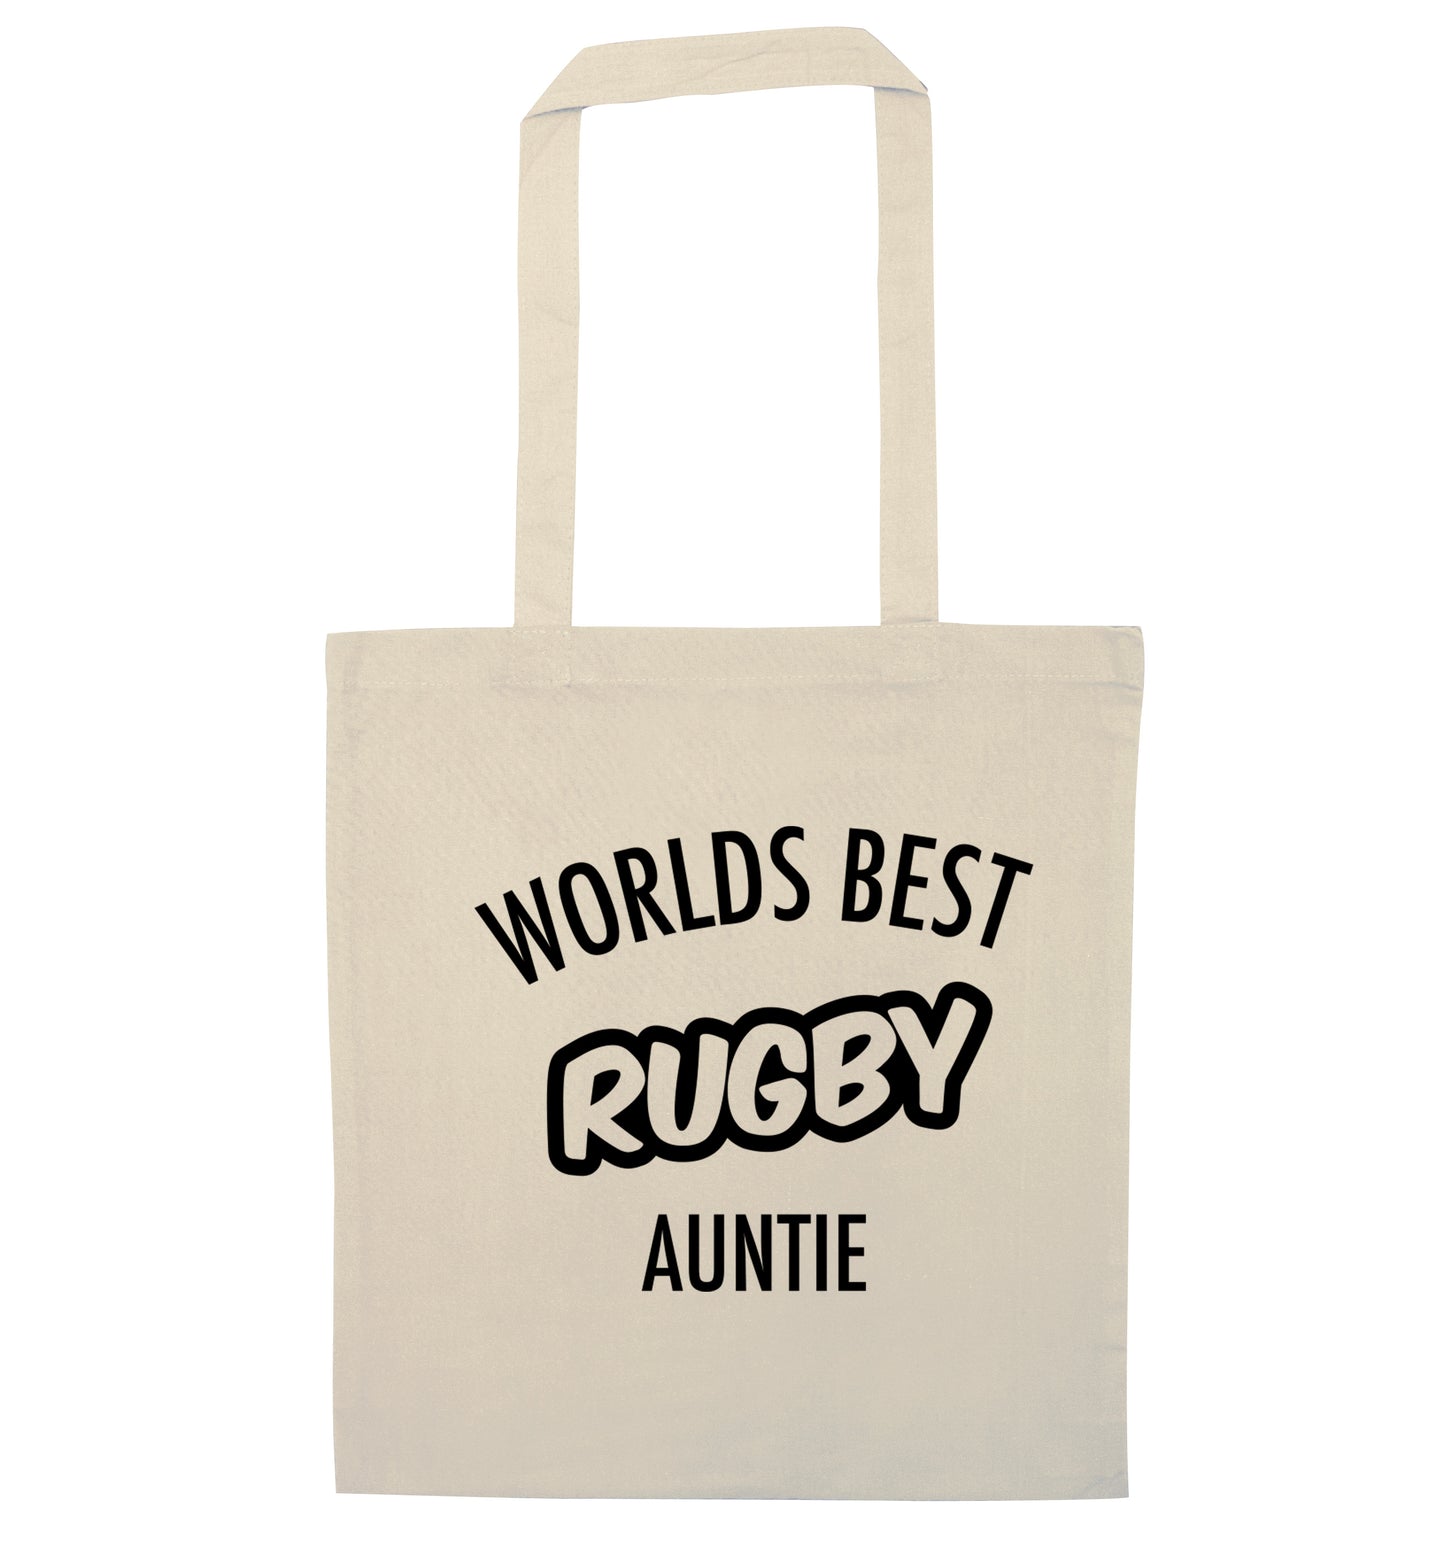 Worlds best rugby auntie natural tote bag